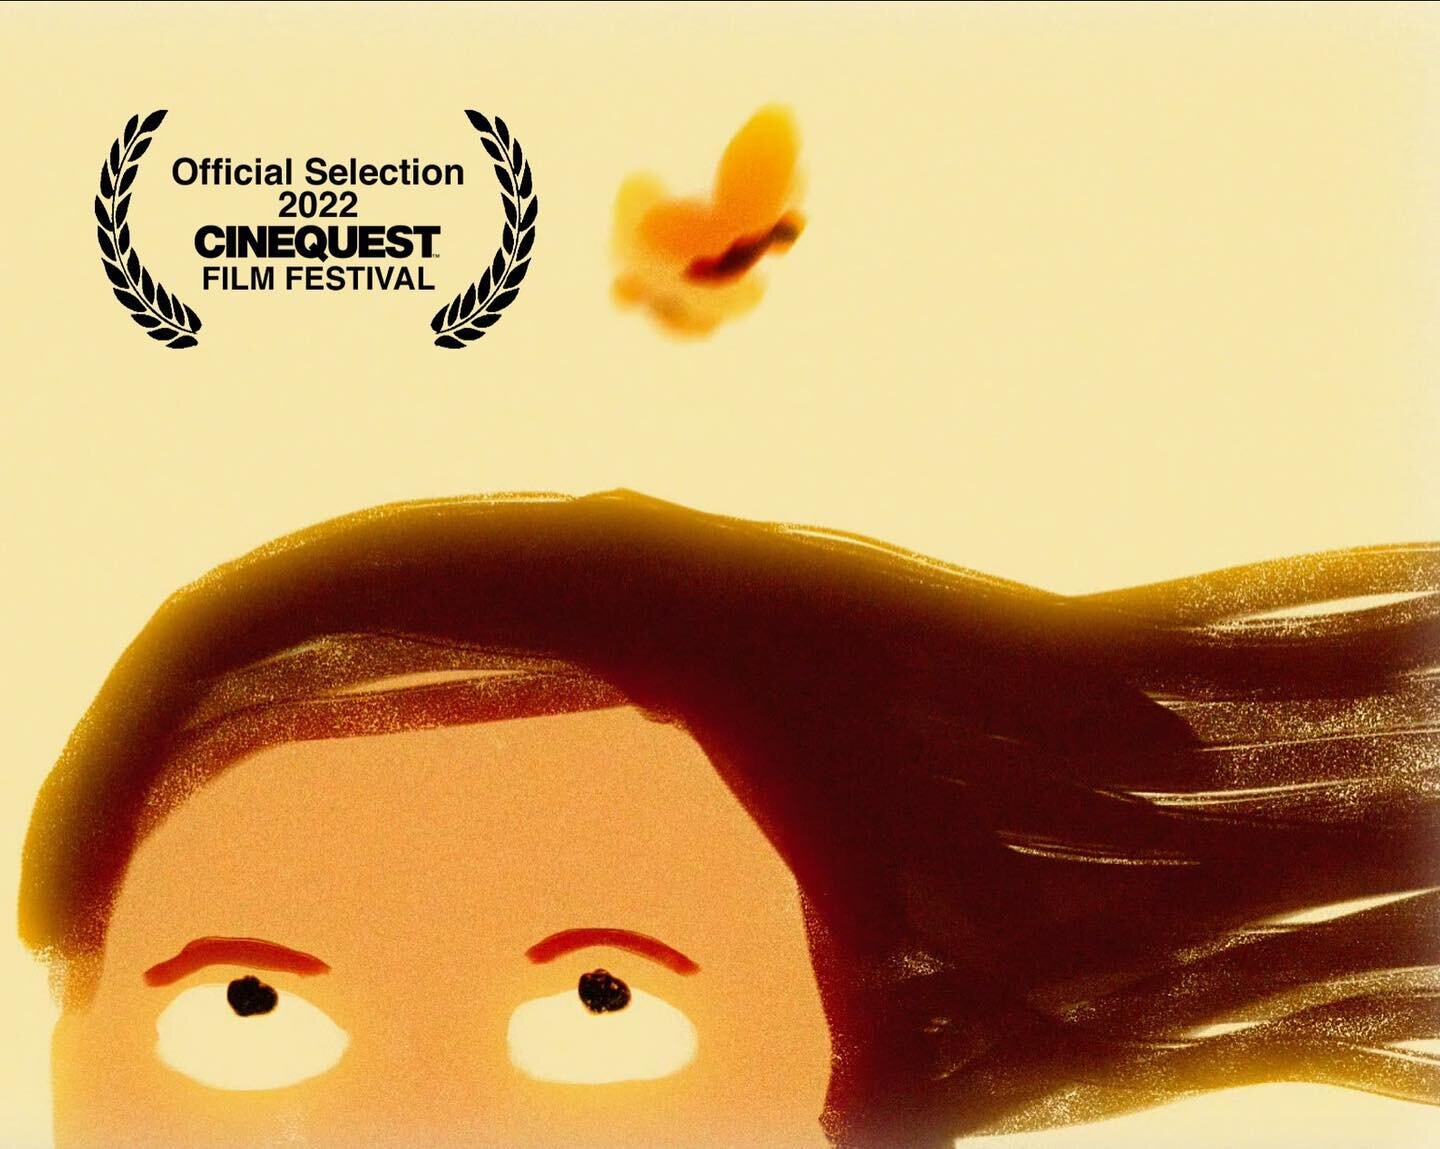 Exciting News!
The Disaster Dreams is now streaming through Sunday April 17th at the Cinequest Cinejoy Virtual Festival 2022. Link in Bio. 

Now is your chance to check out the latest film from Keep or Destroy, in association with Developing Artists!